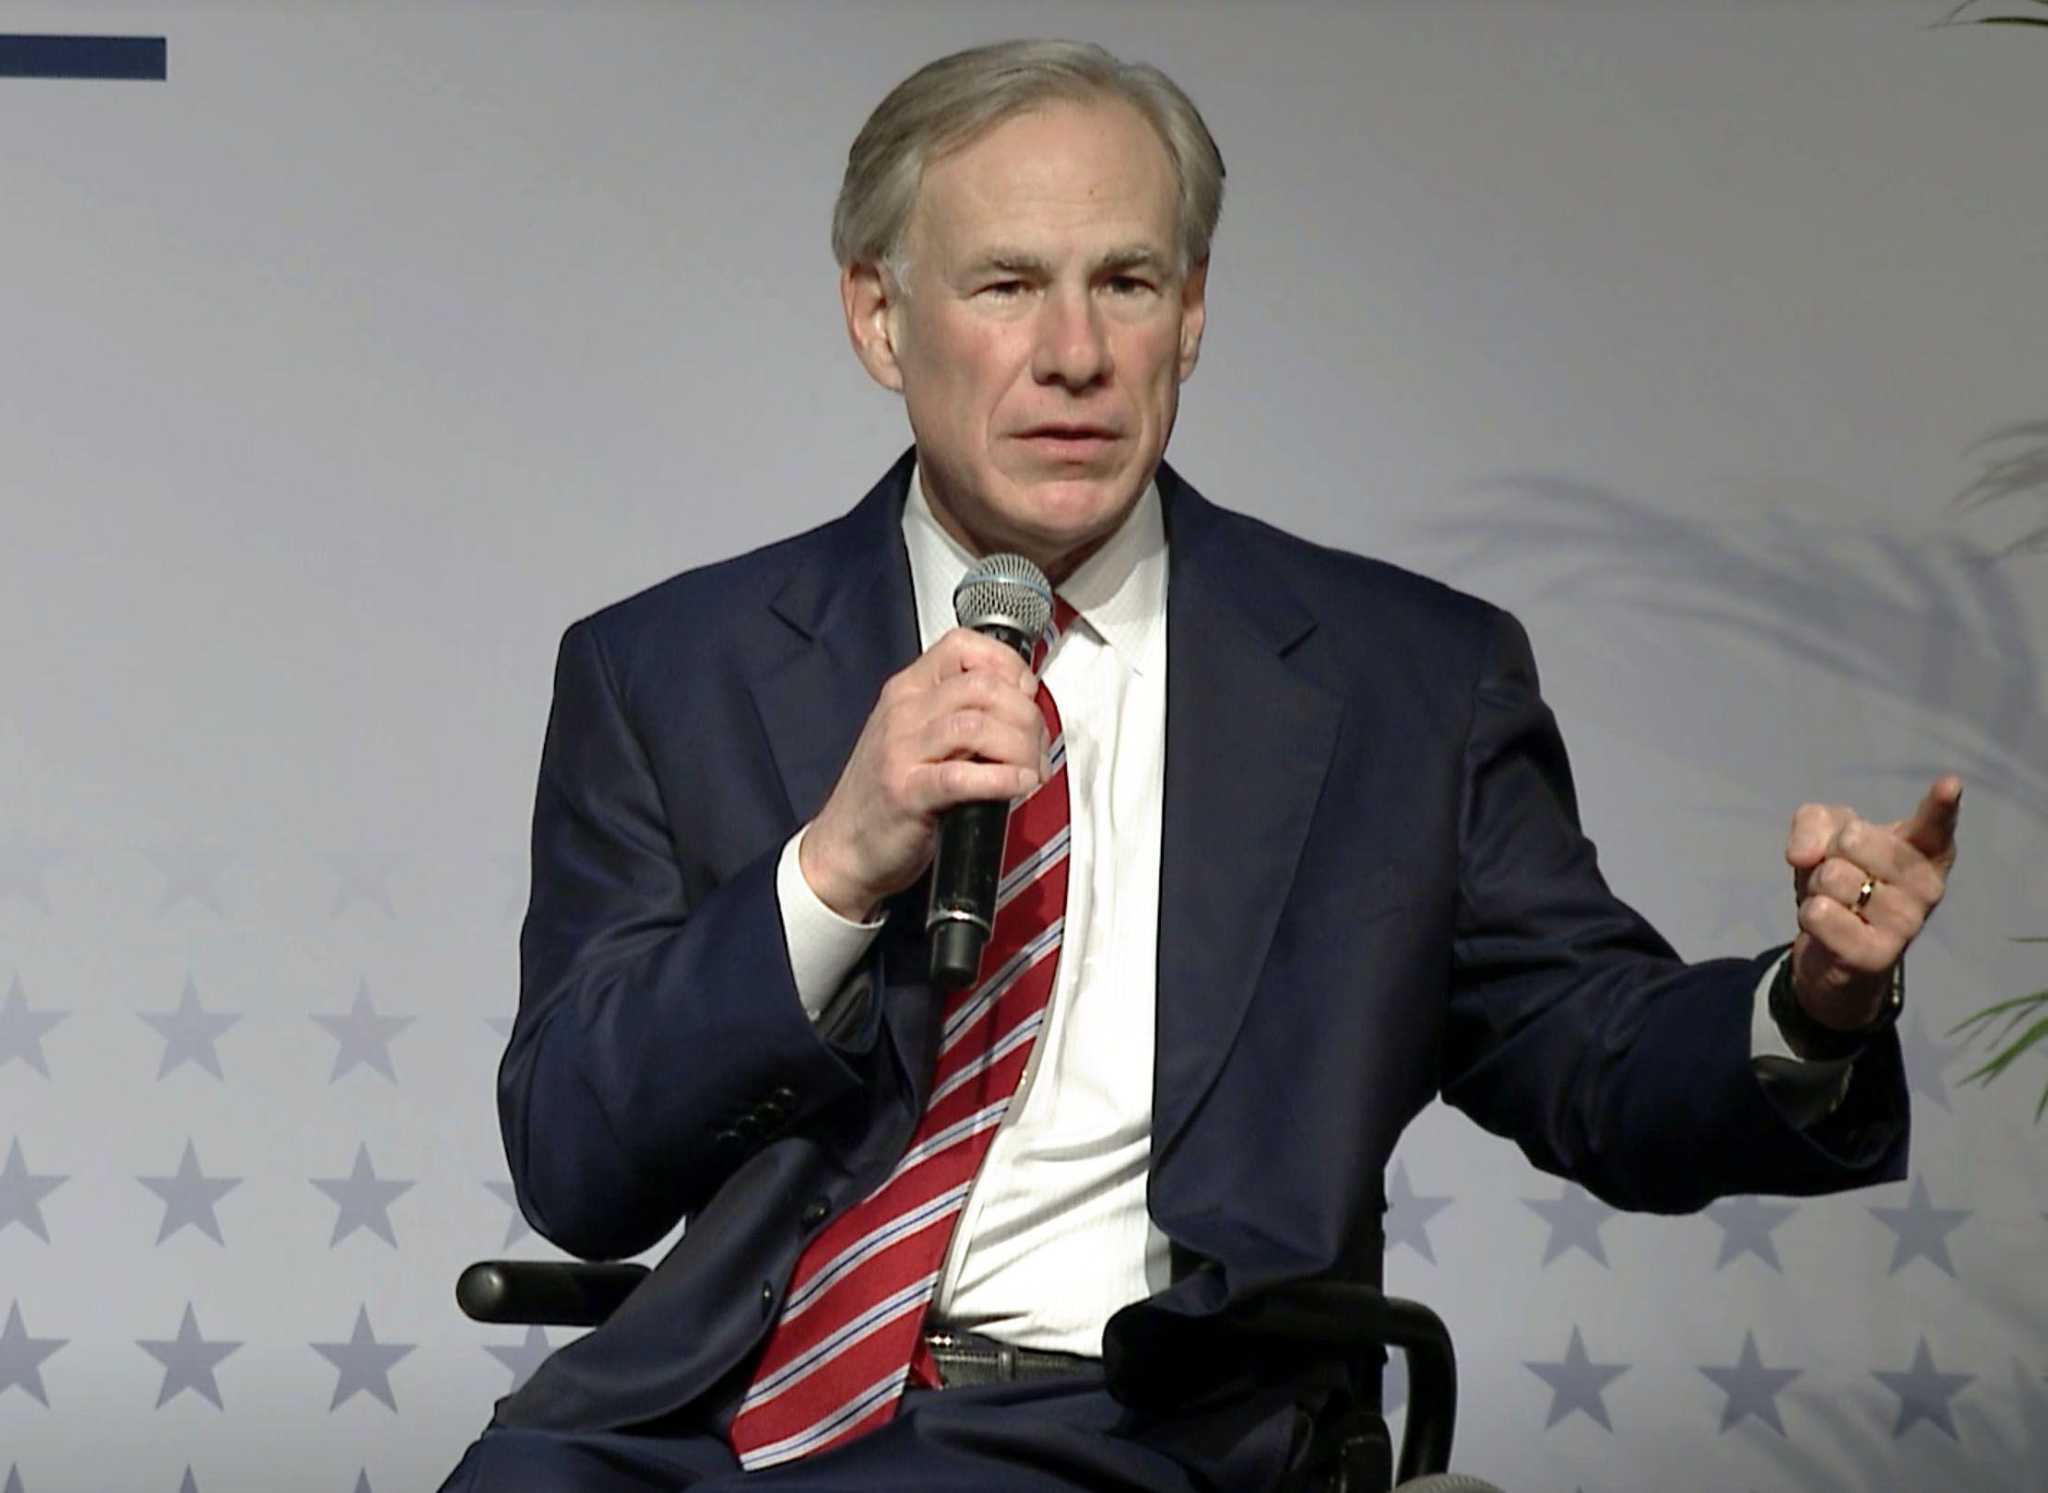 Gov. Greg Abbott plans to relax business restrictions soon if COVID19